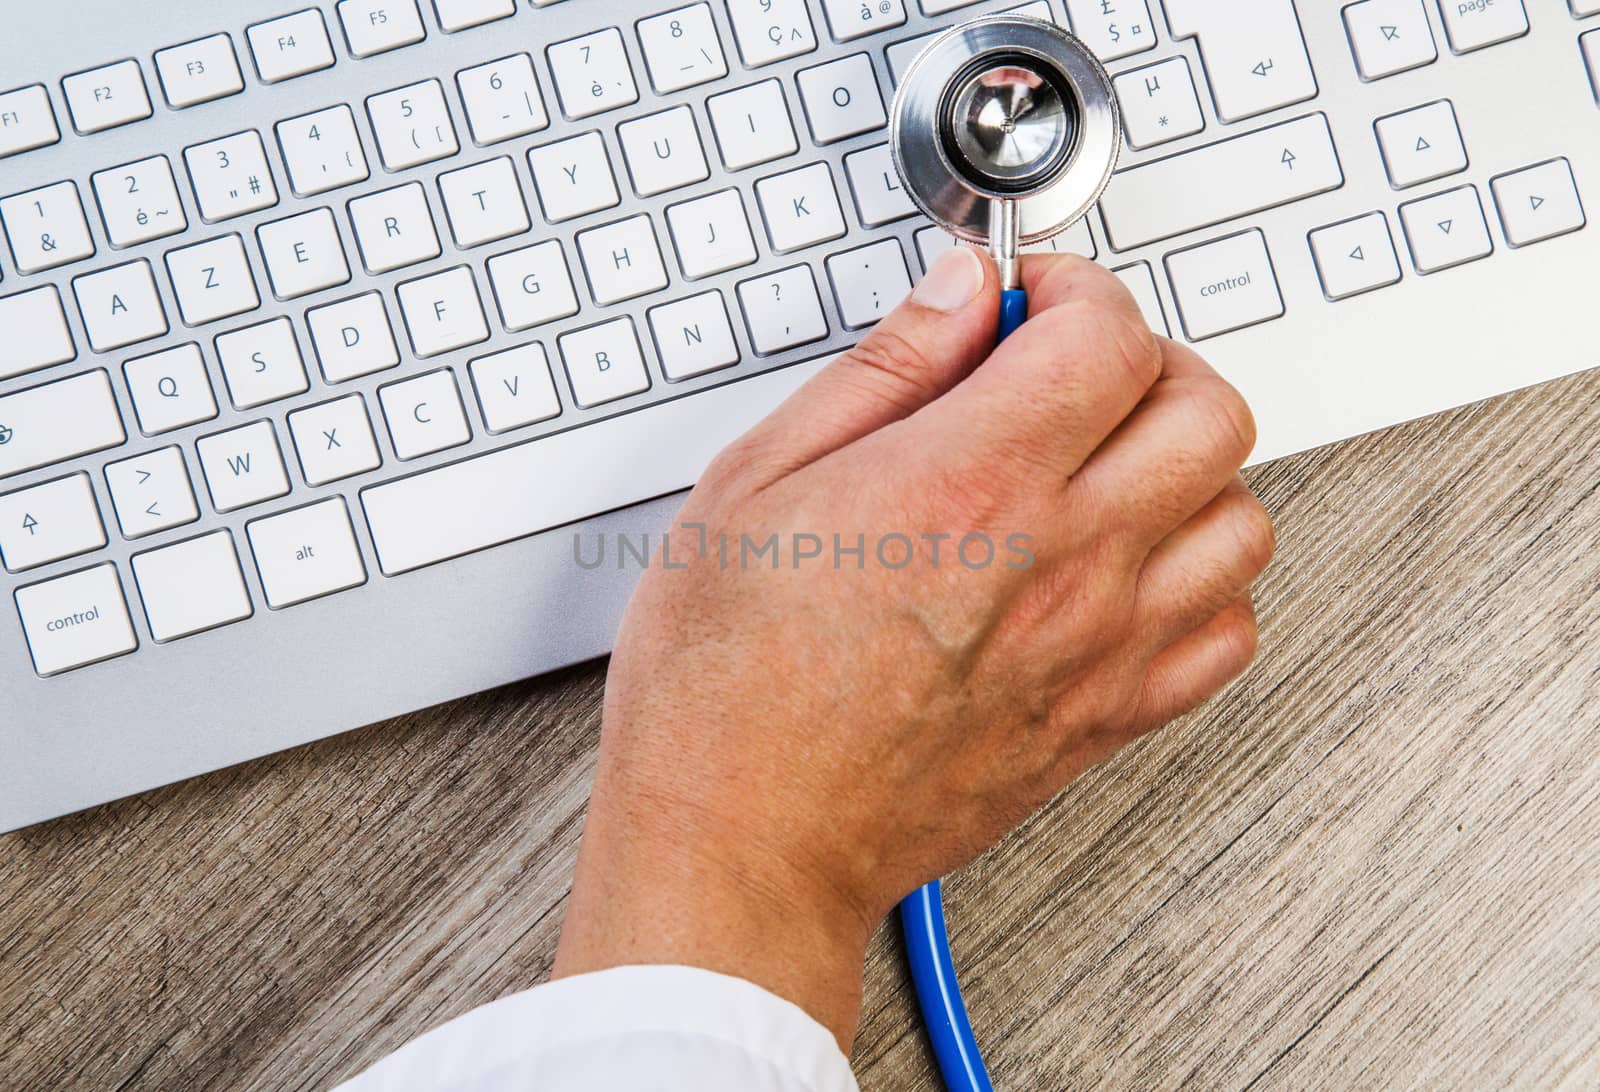 Expert examining a keyboard with stethoscope